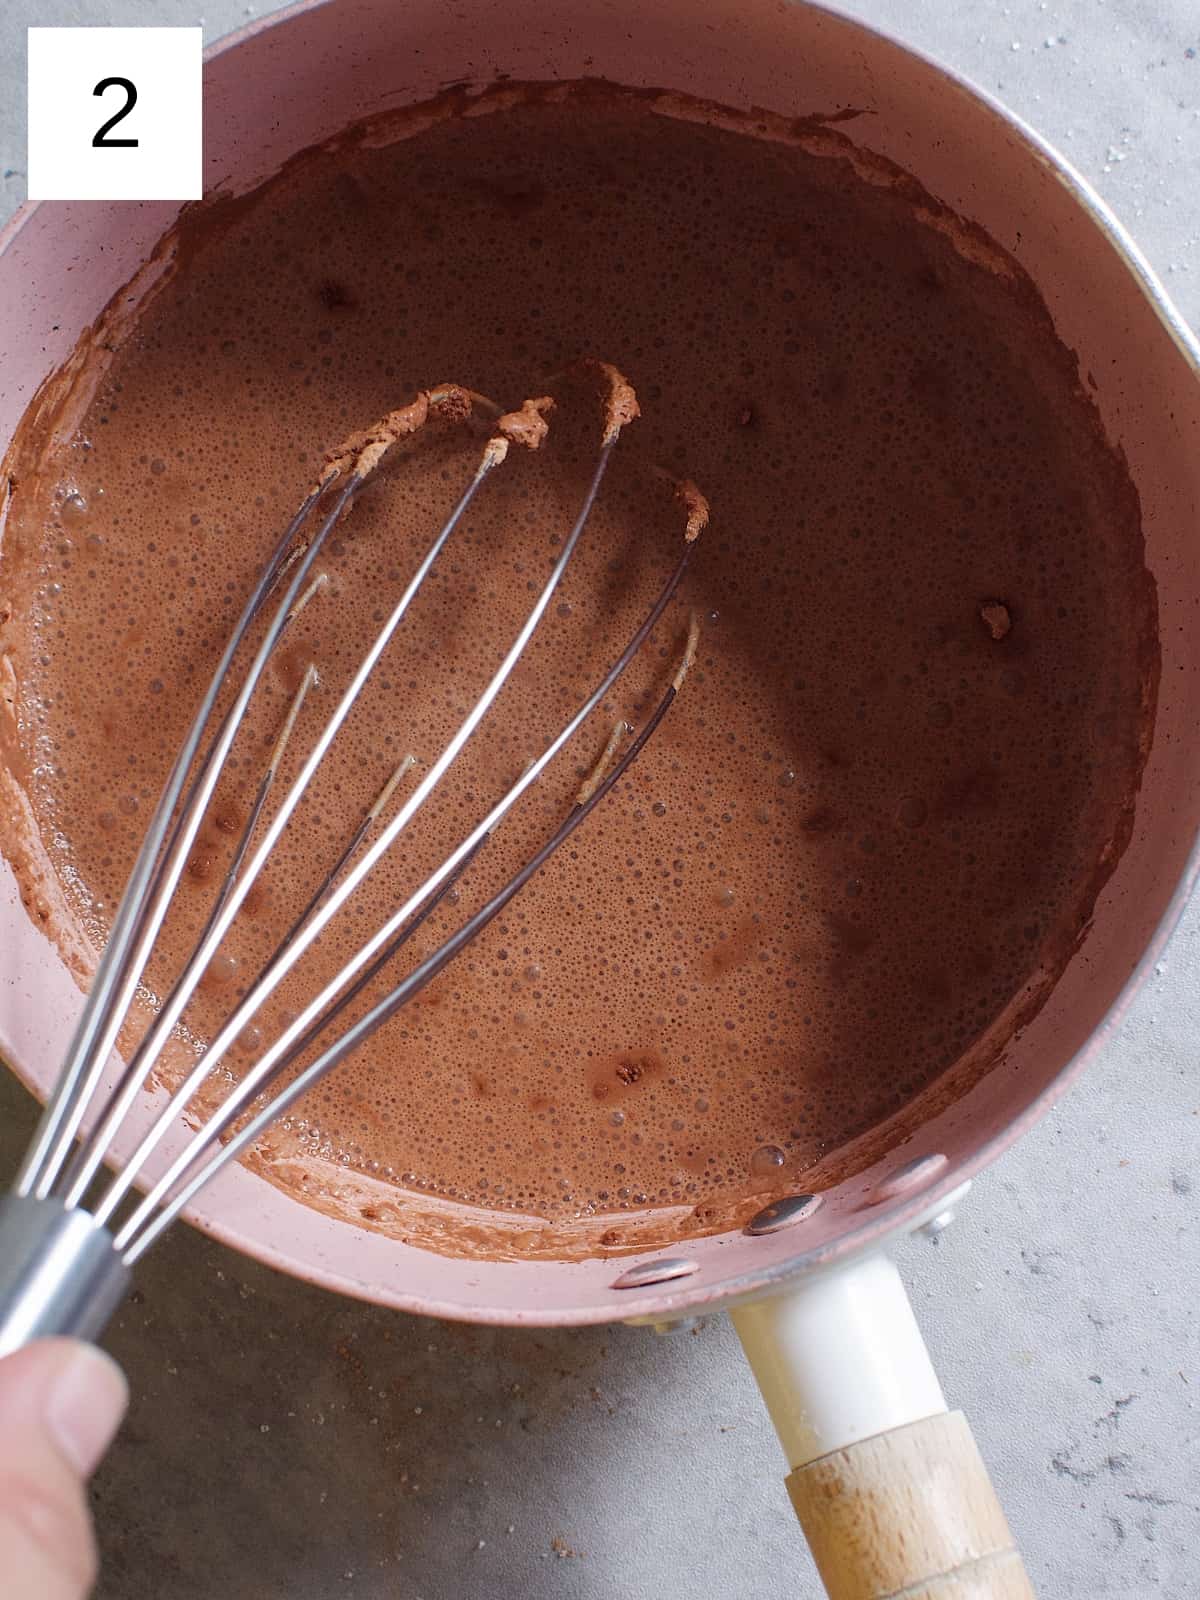 Whisking a dissolved cocoa powder in a sauce pan.